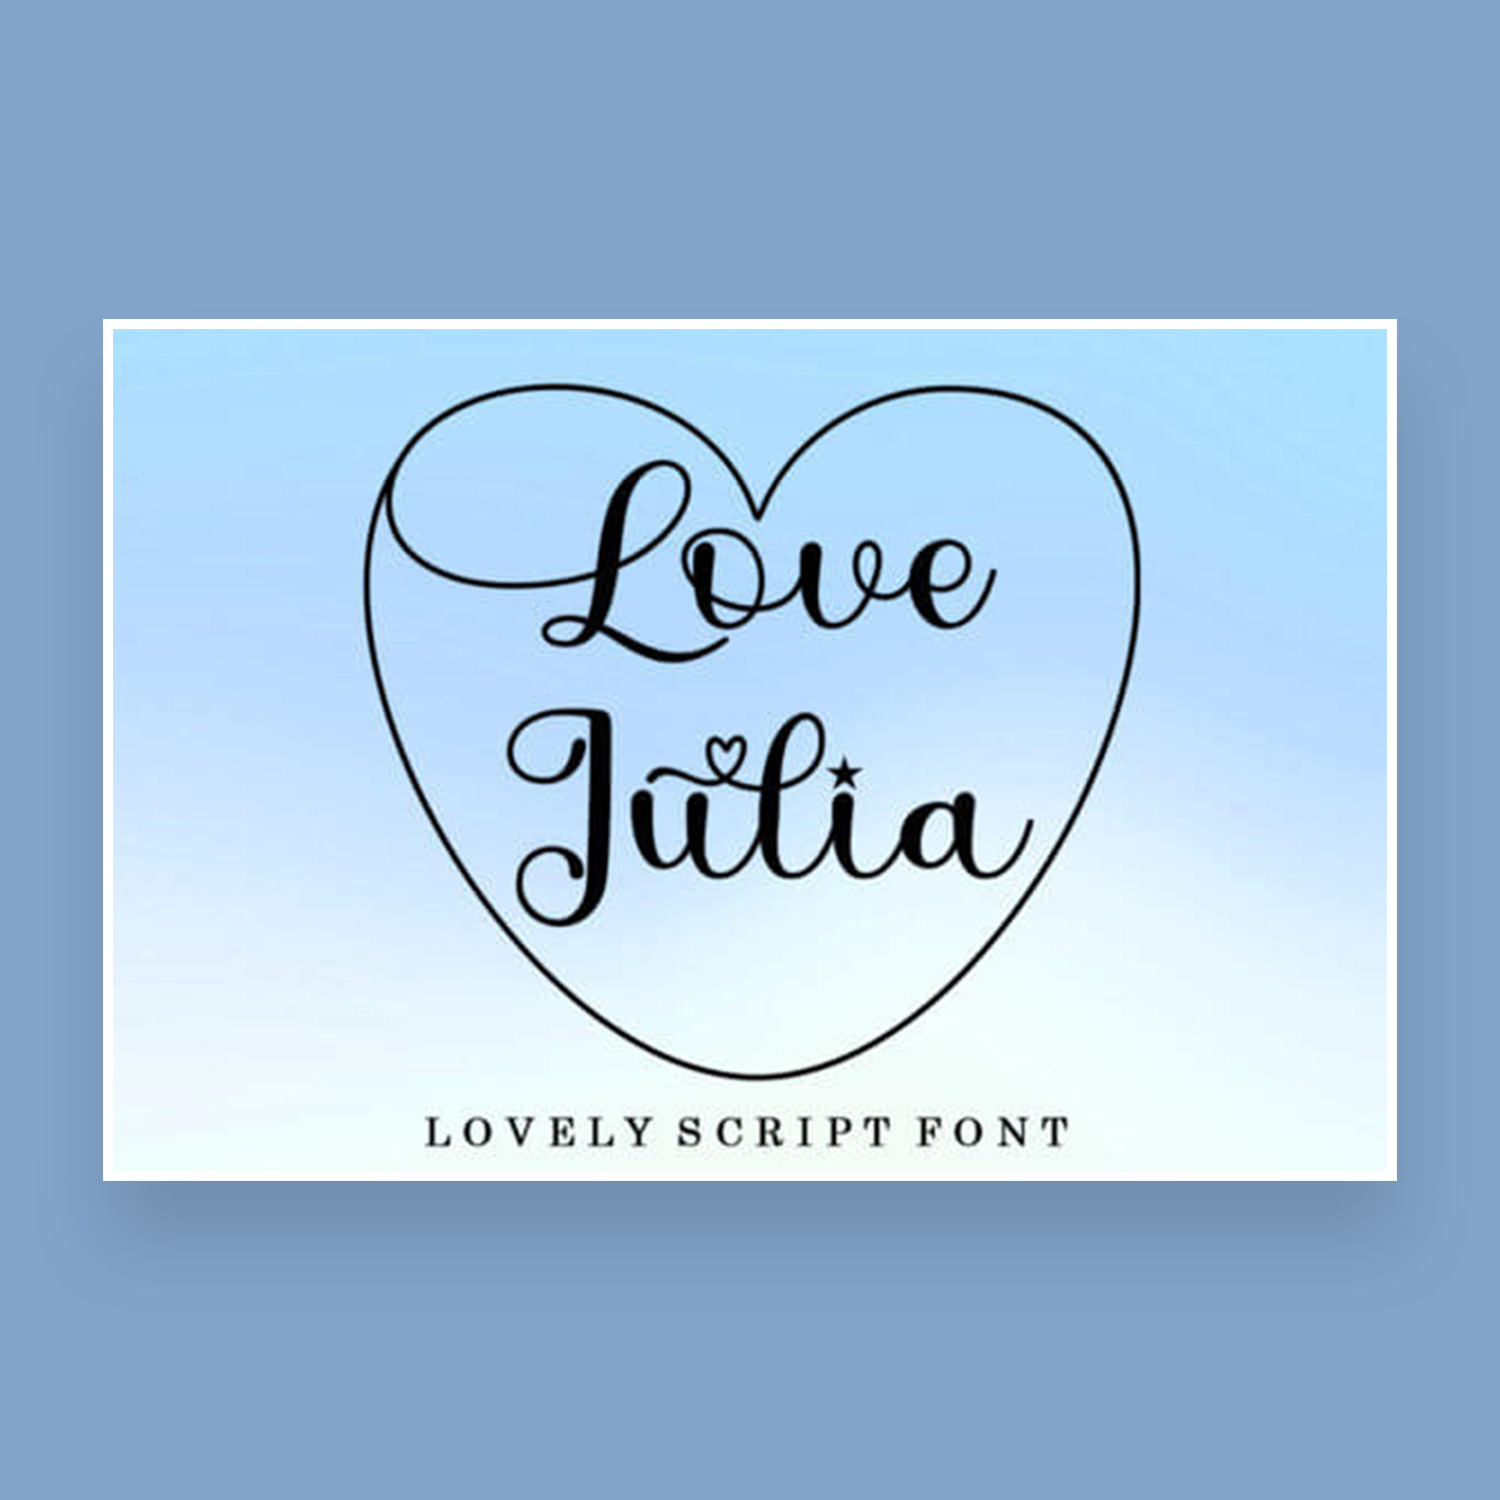 love julia quirky and playful handwritten font cover image.